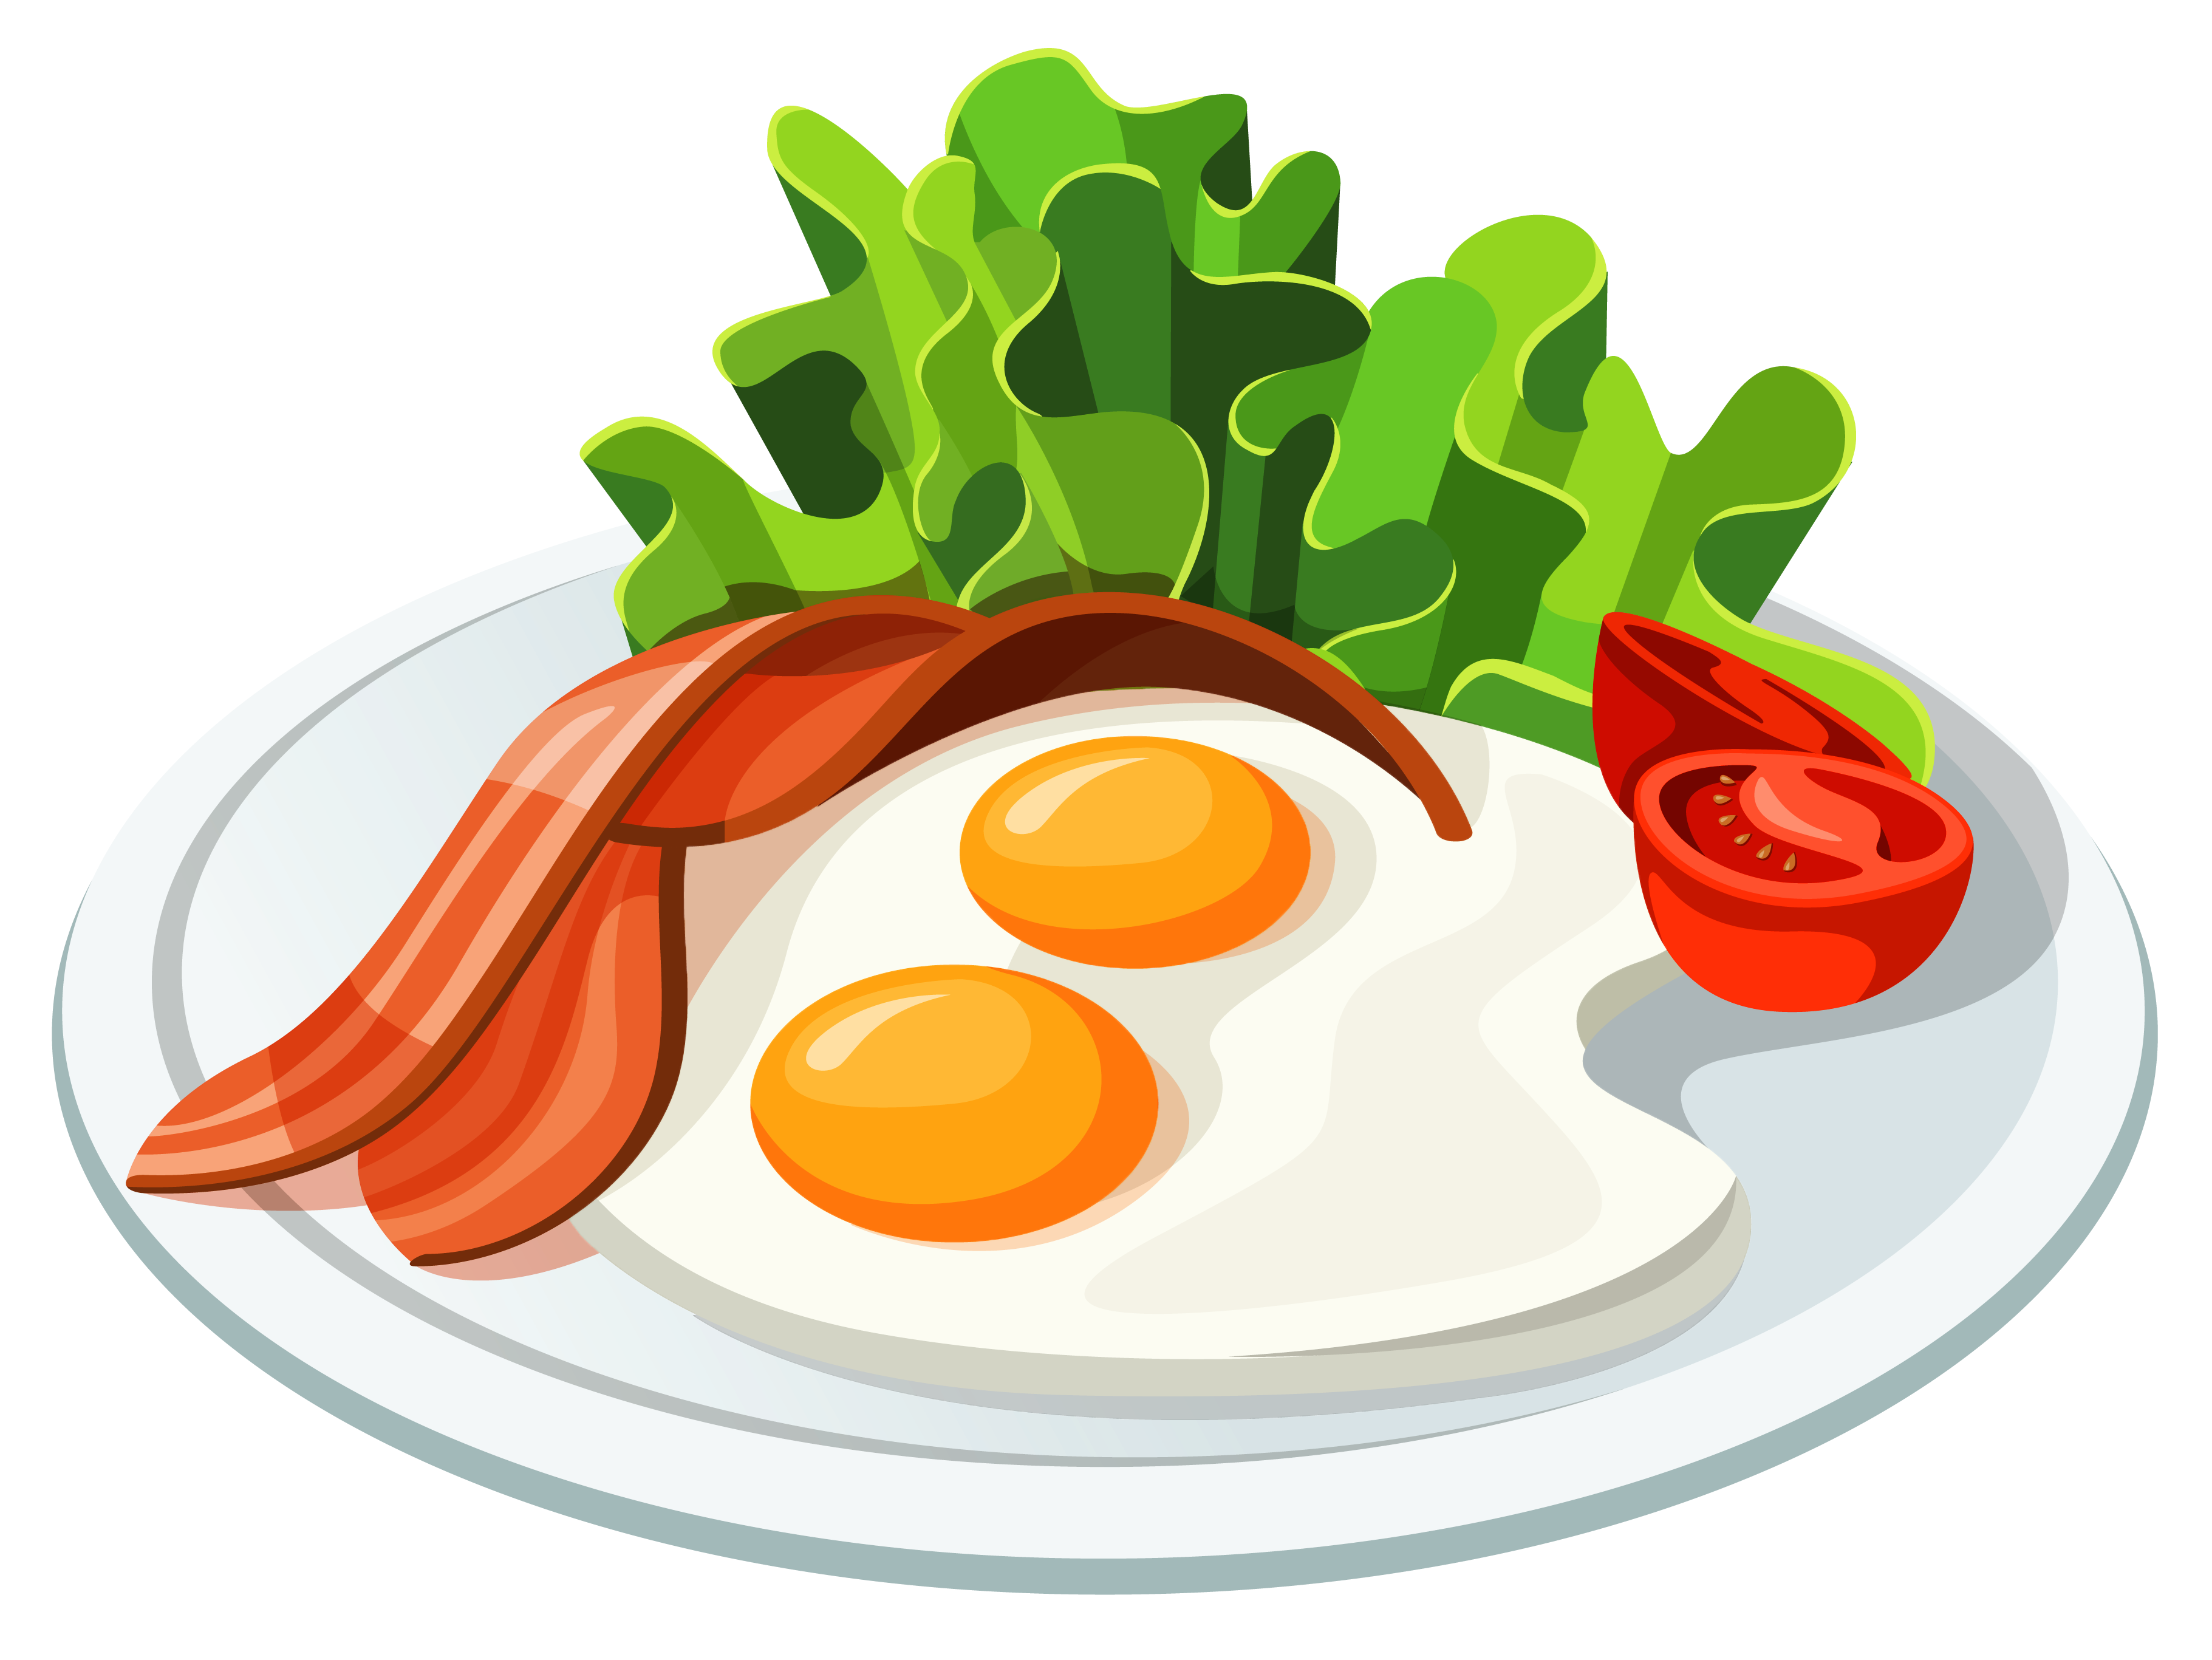 Yogurt clipart food packaging. Eggs and bacon png